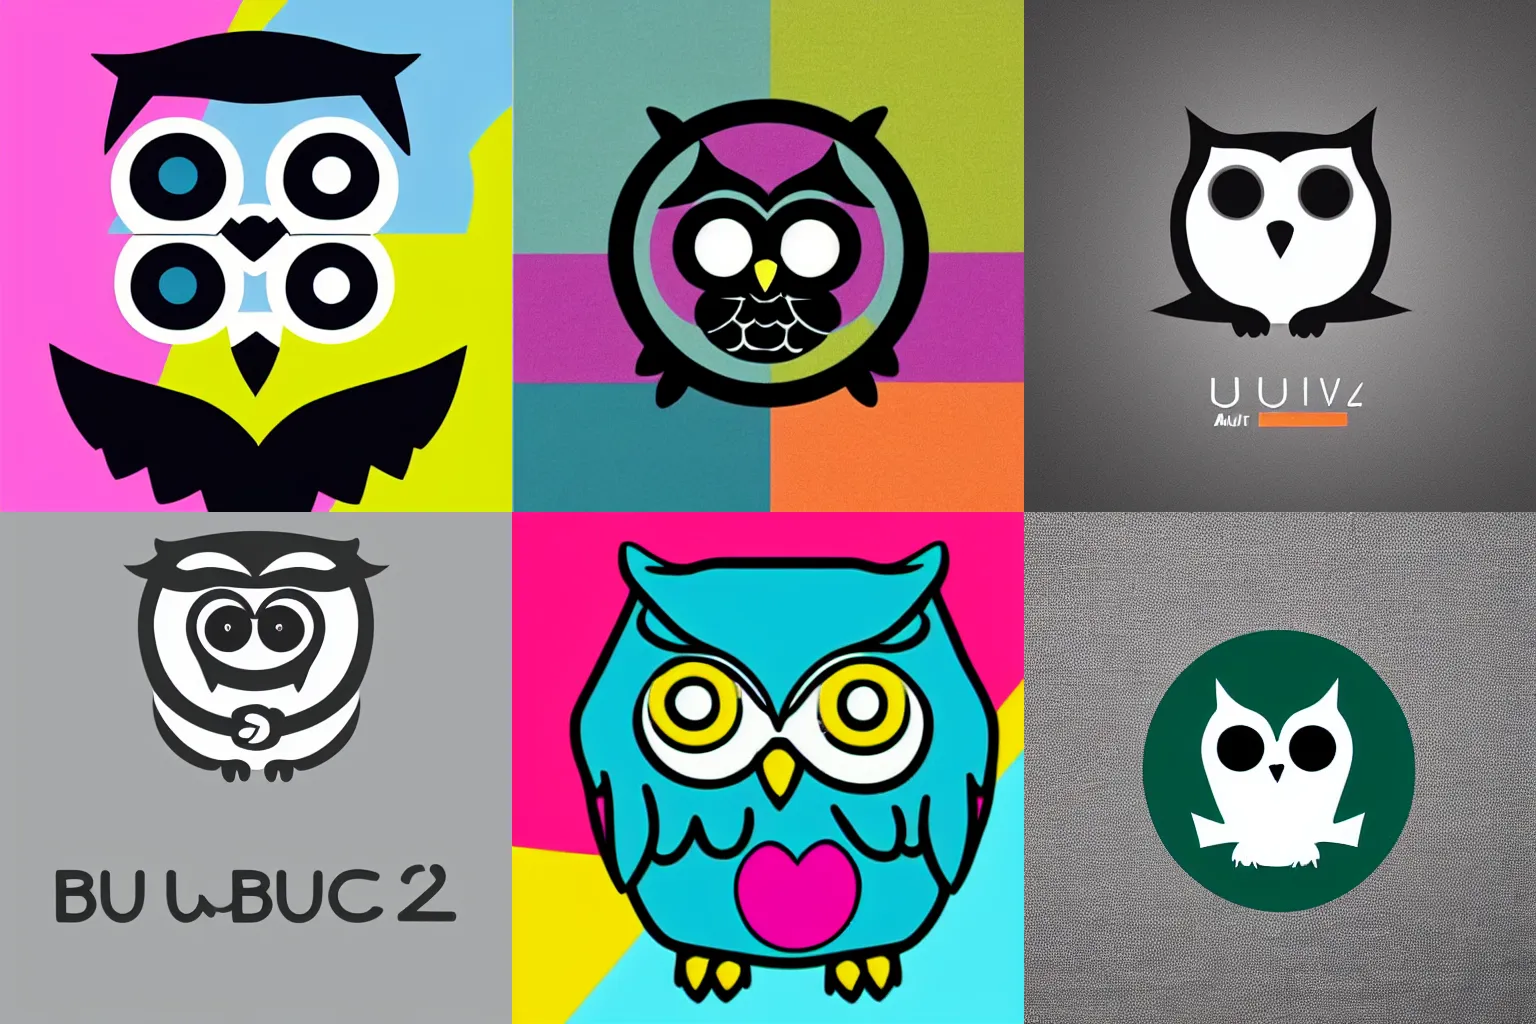 Prompt: A minimalist logo of a cute owl in the y2k style, bauhaus style, created by The Designers Republic, vibrant colors